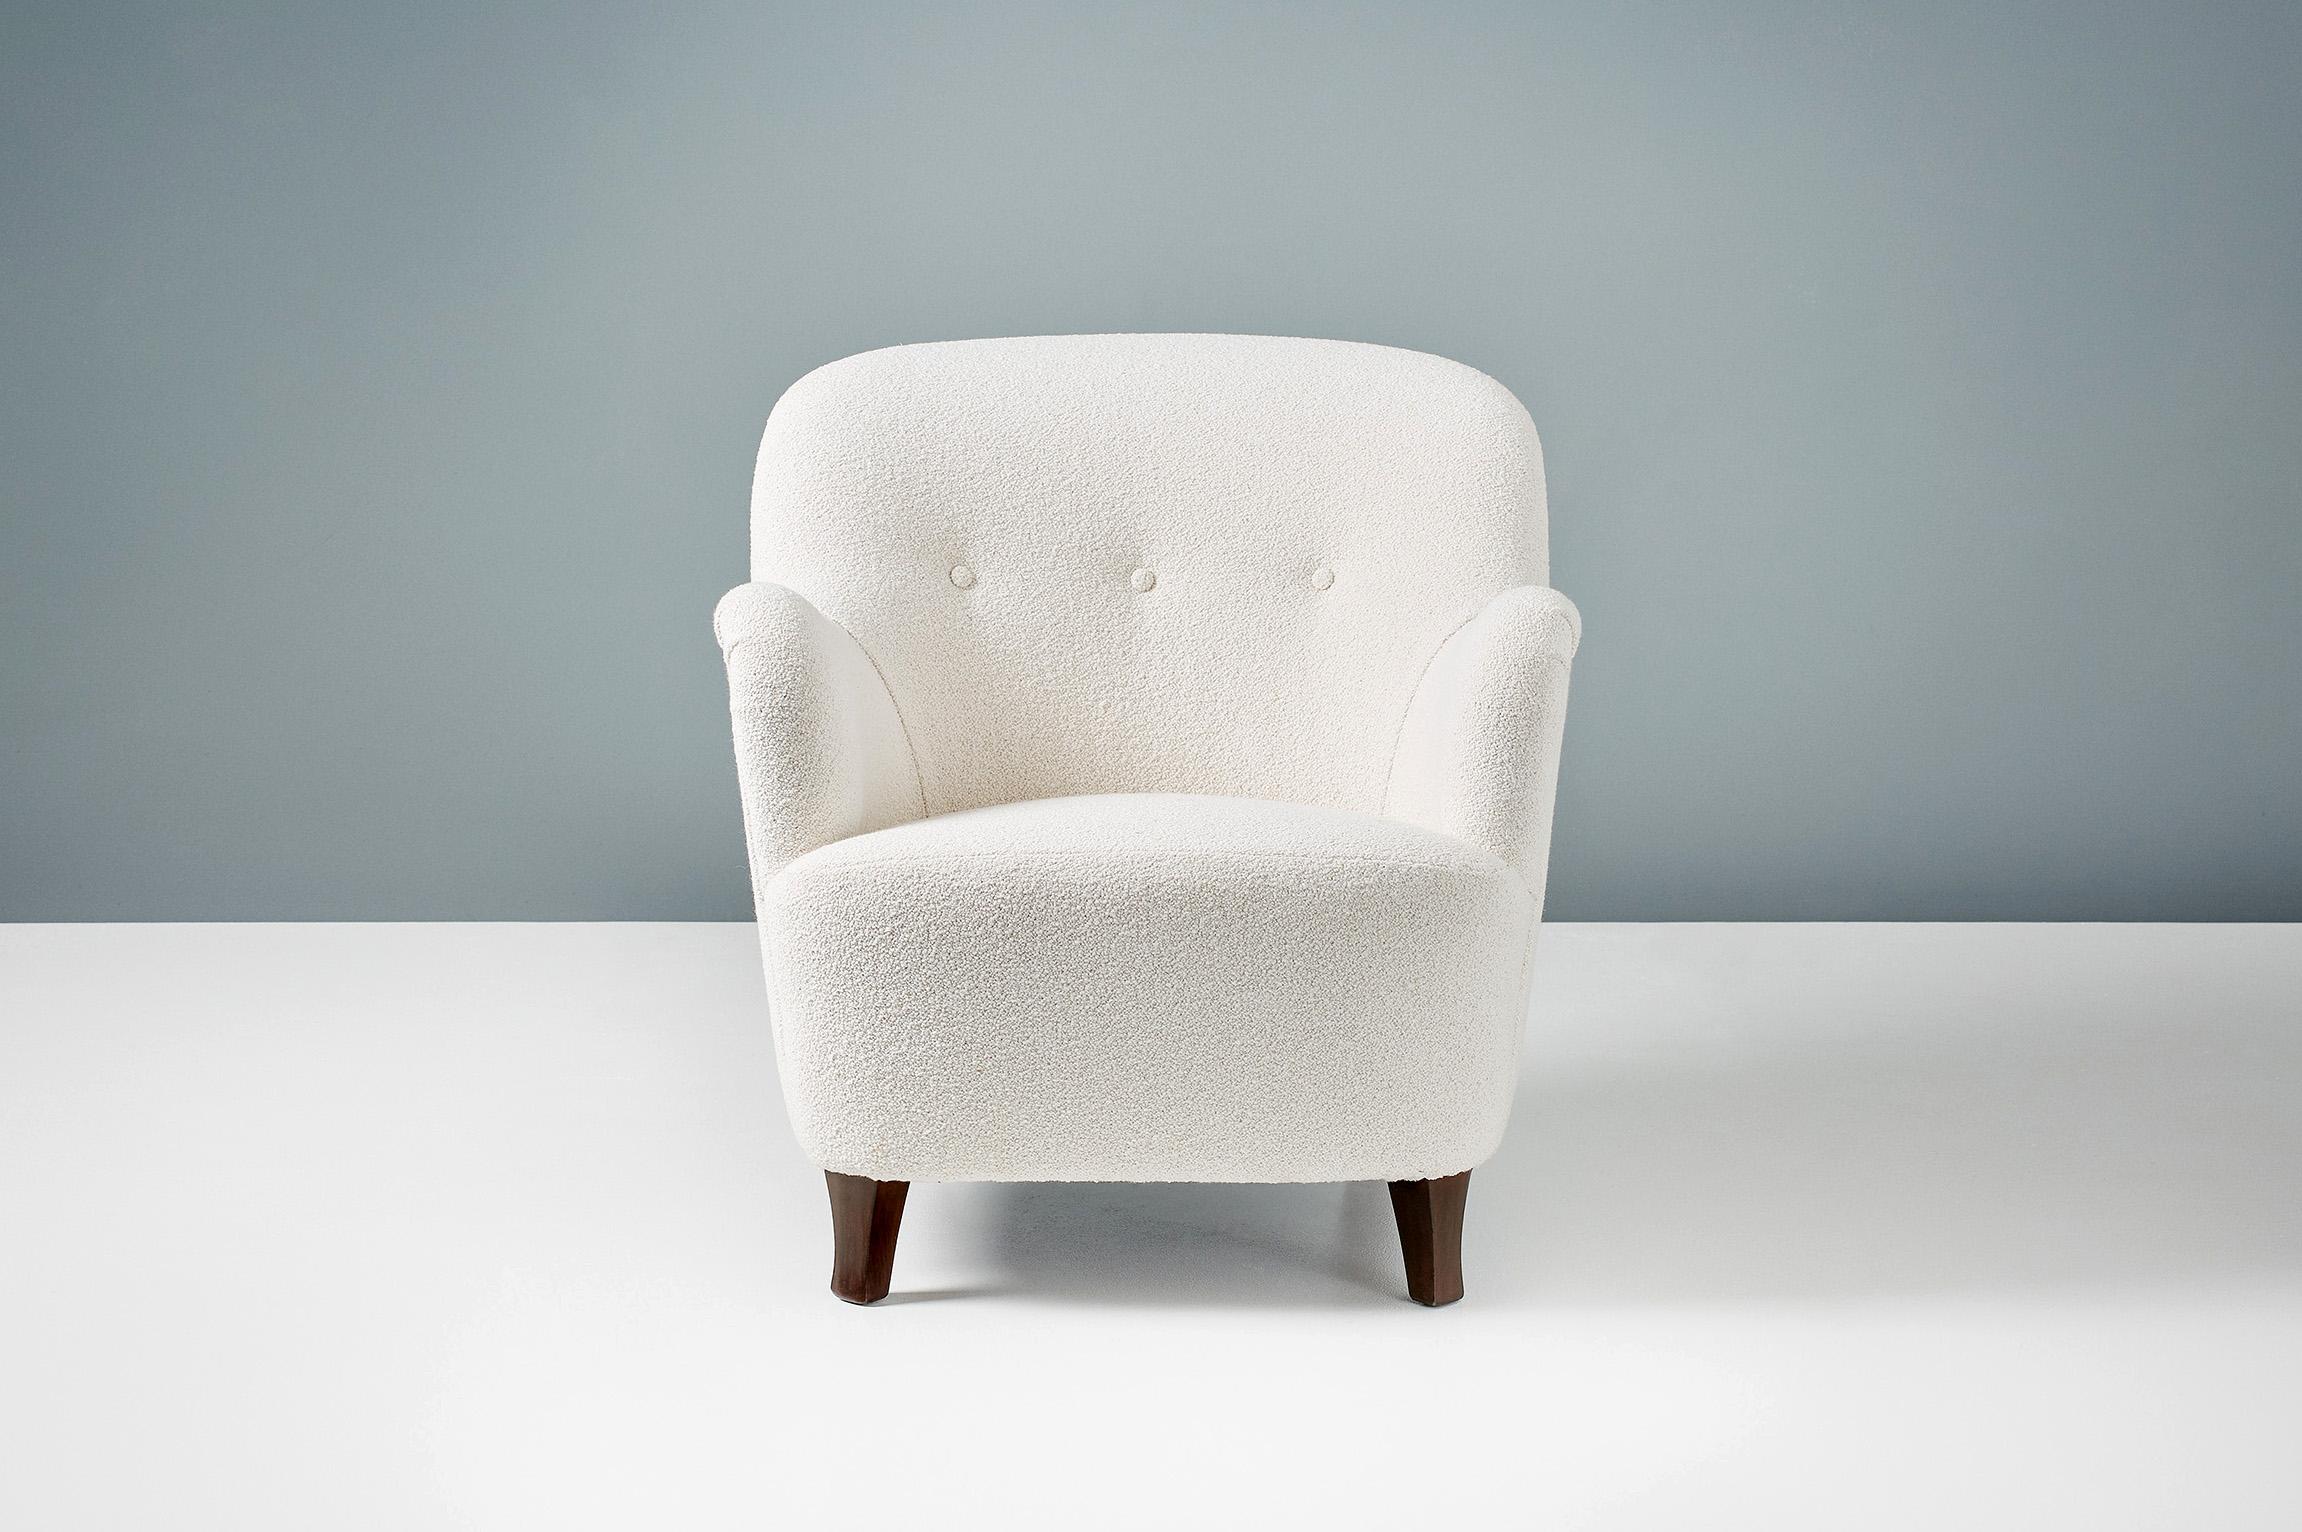 Dagmar Design

Elias lounge chair

A custom made lounge chair developed and hand-made at our workshops in London using the highest quality materials. The Elias chair is available to order in a range of different shearling colours and fabrics